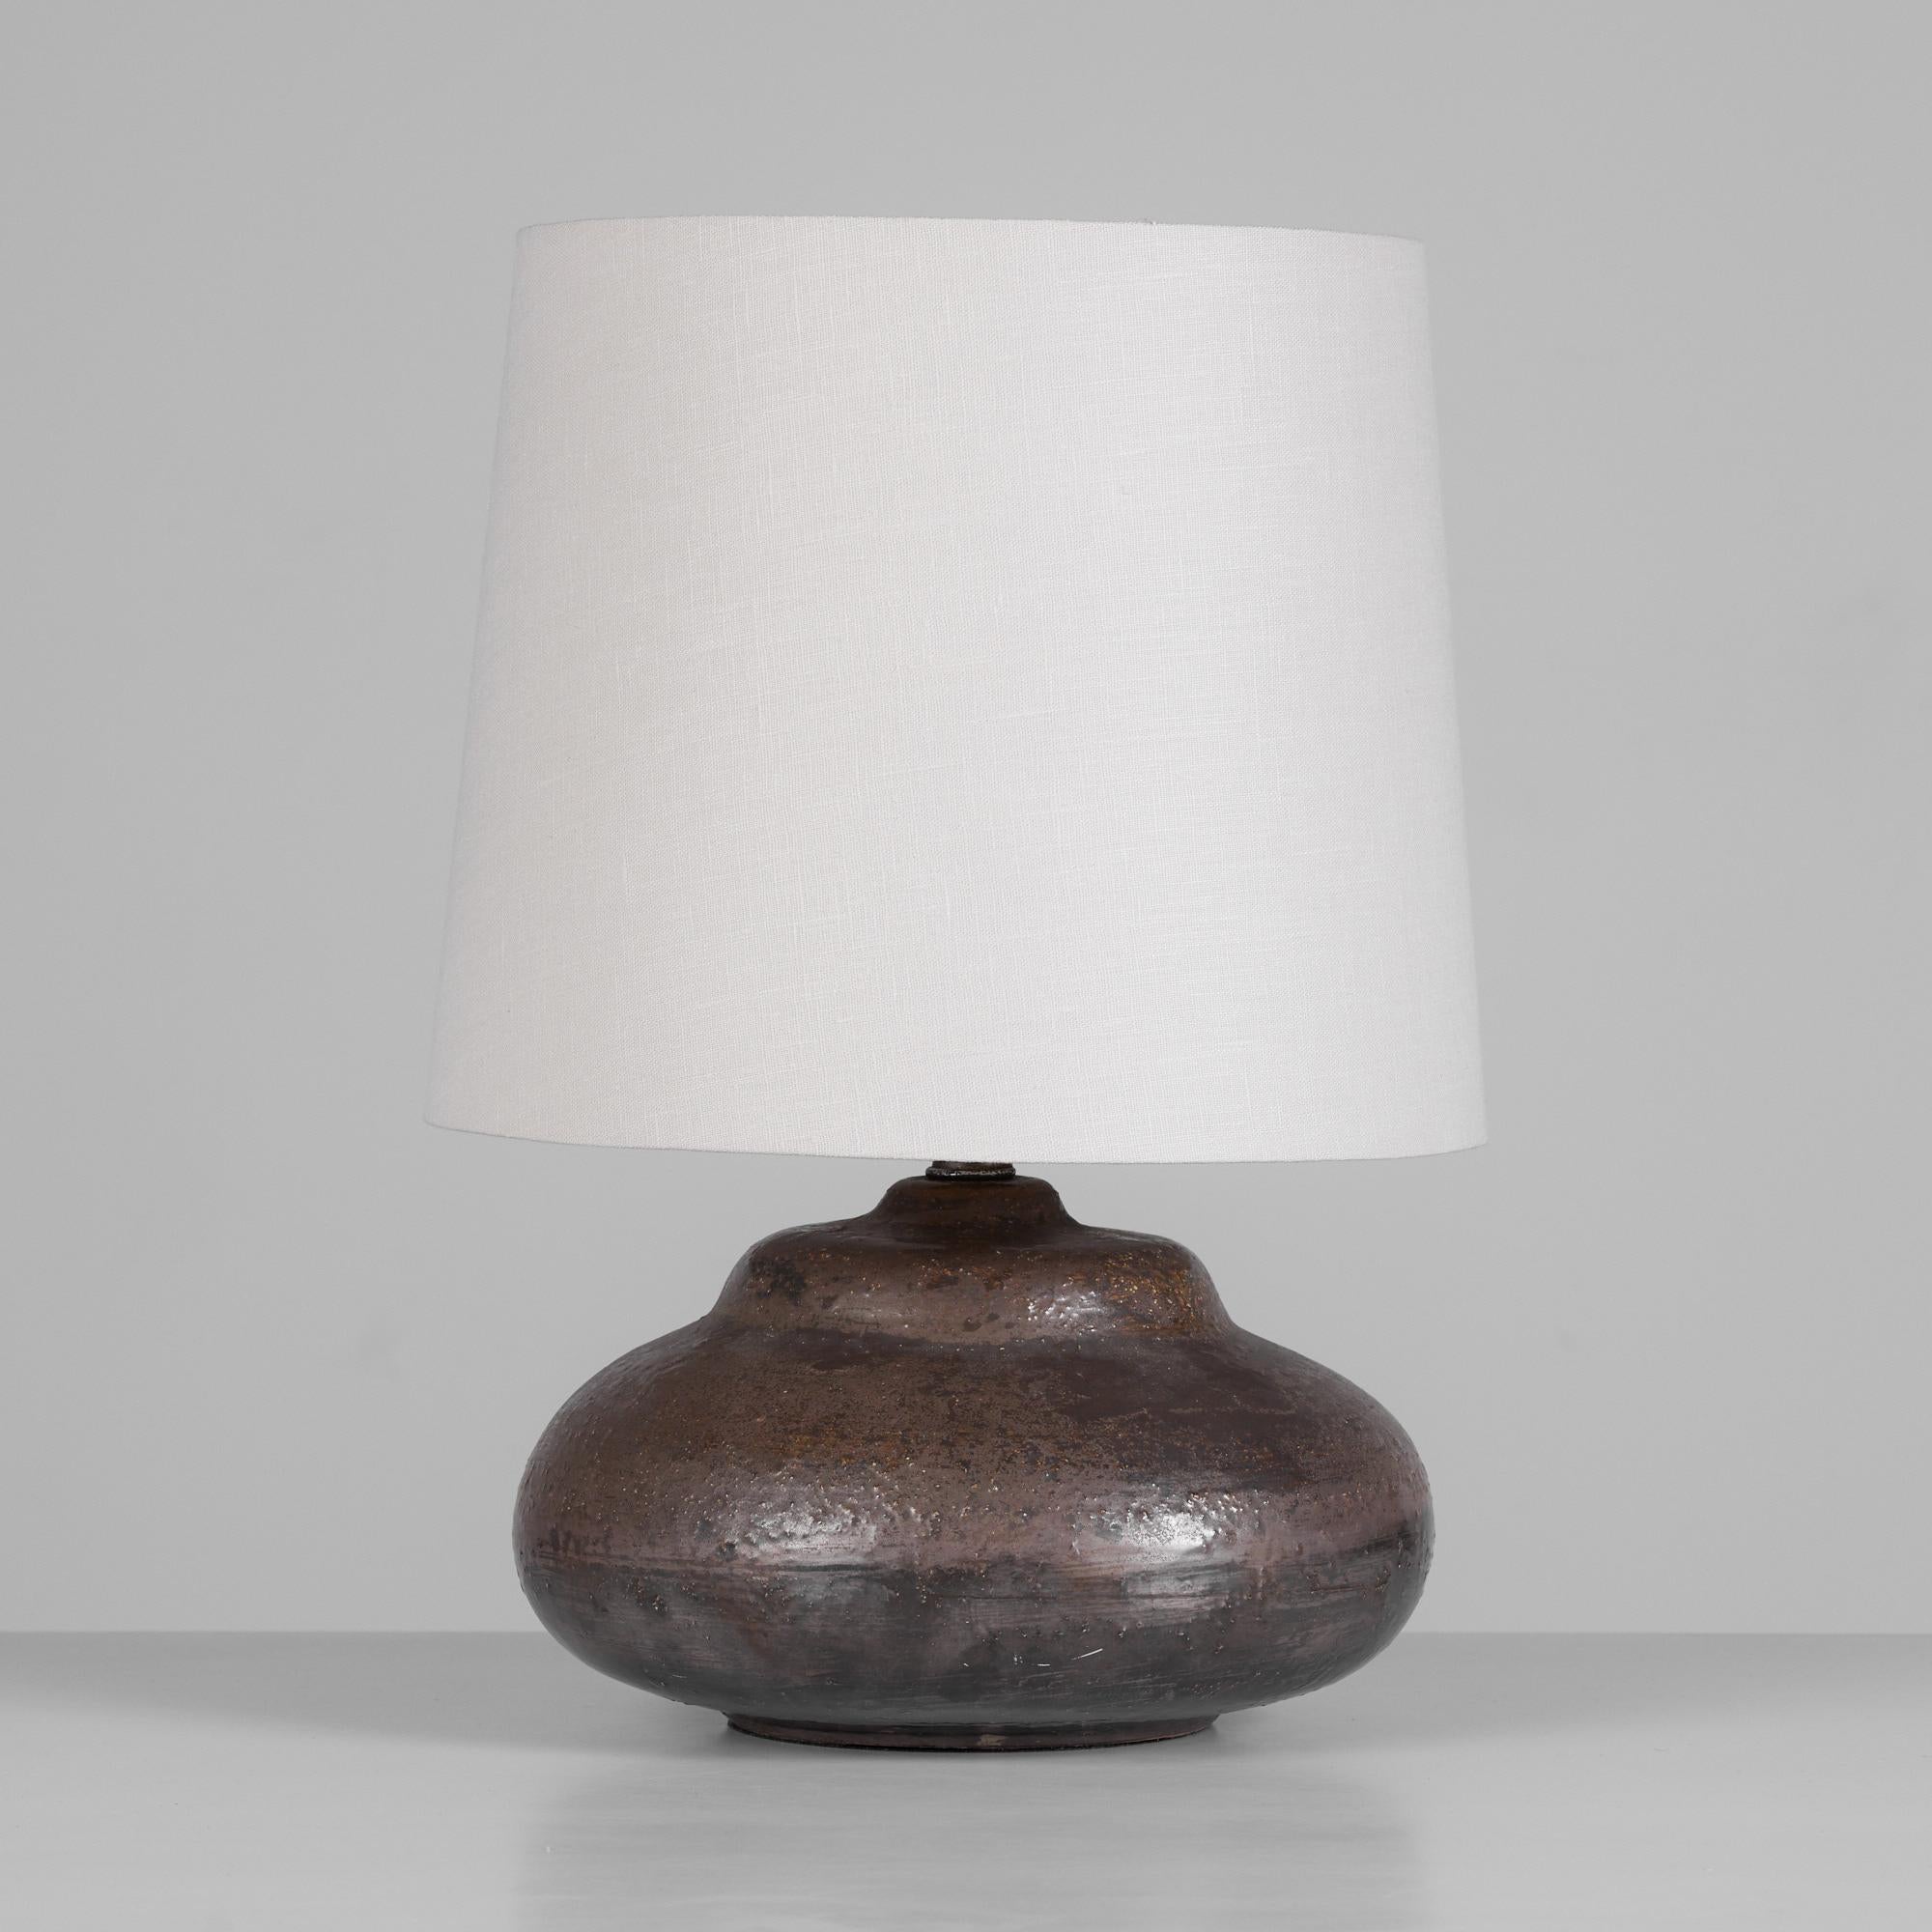 This ceramic table lamp by Aldo Londi for Bitossi, Italy, c.1960s features a stout, tiered curvaceous base that is finished in a brown and 